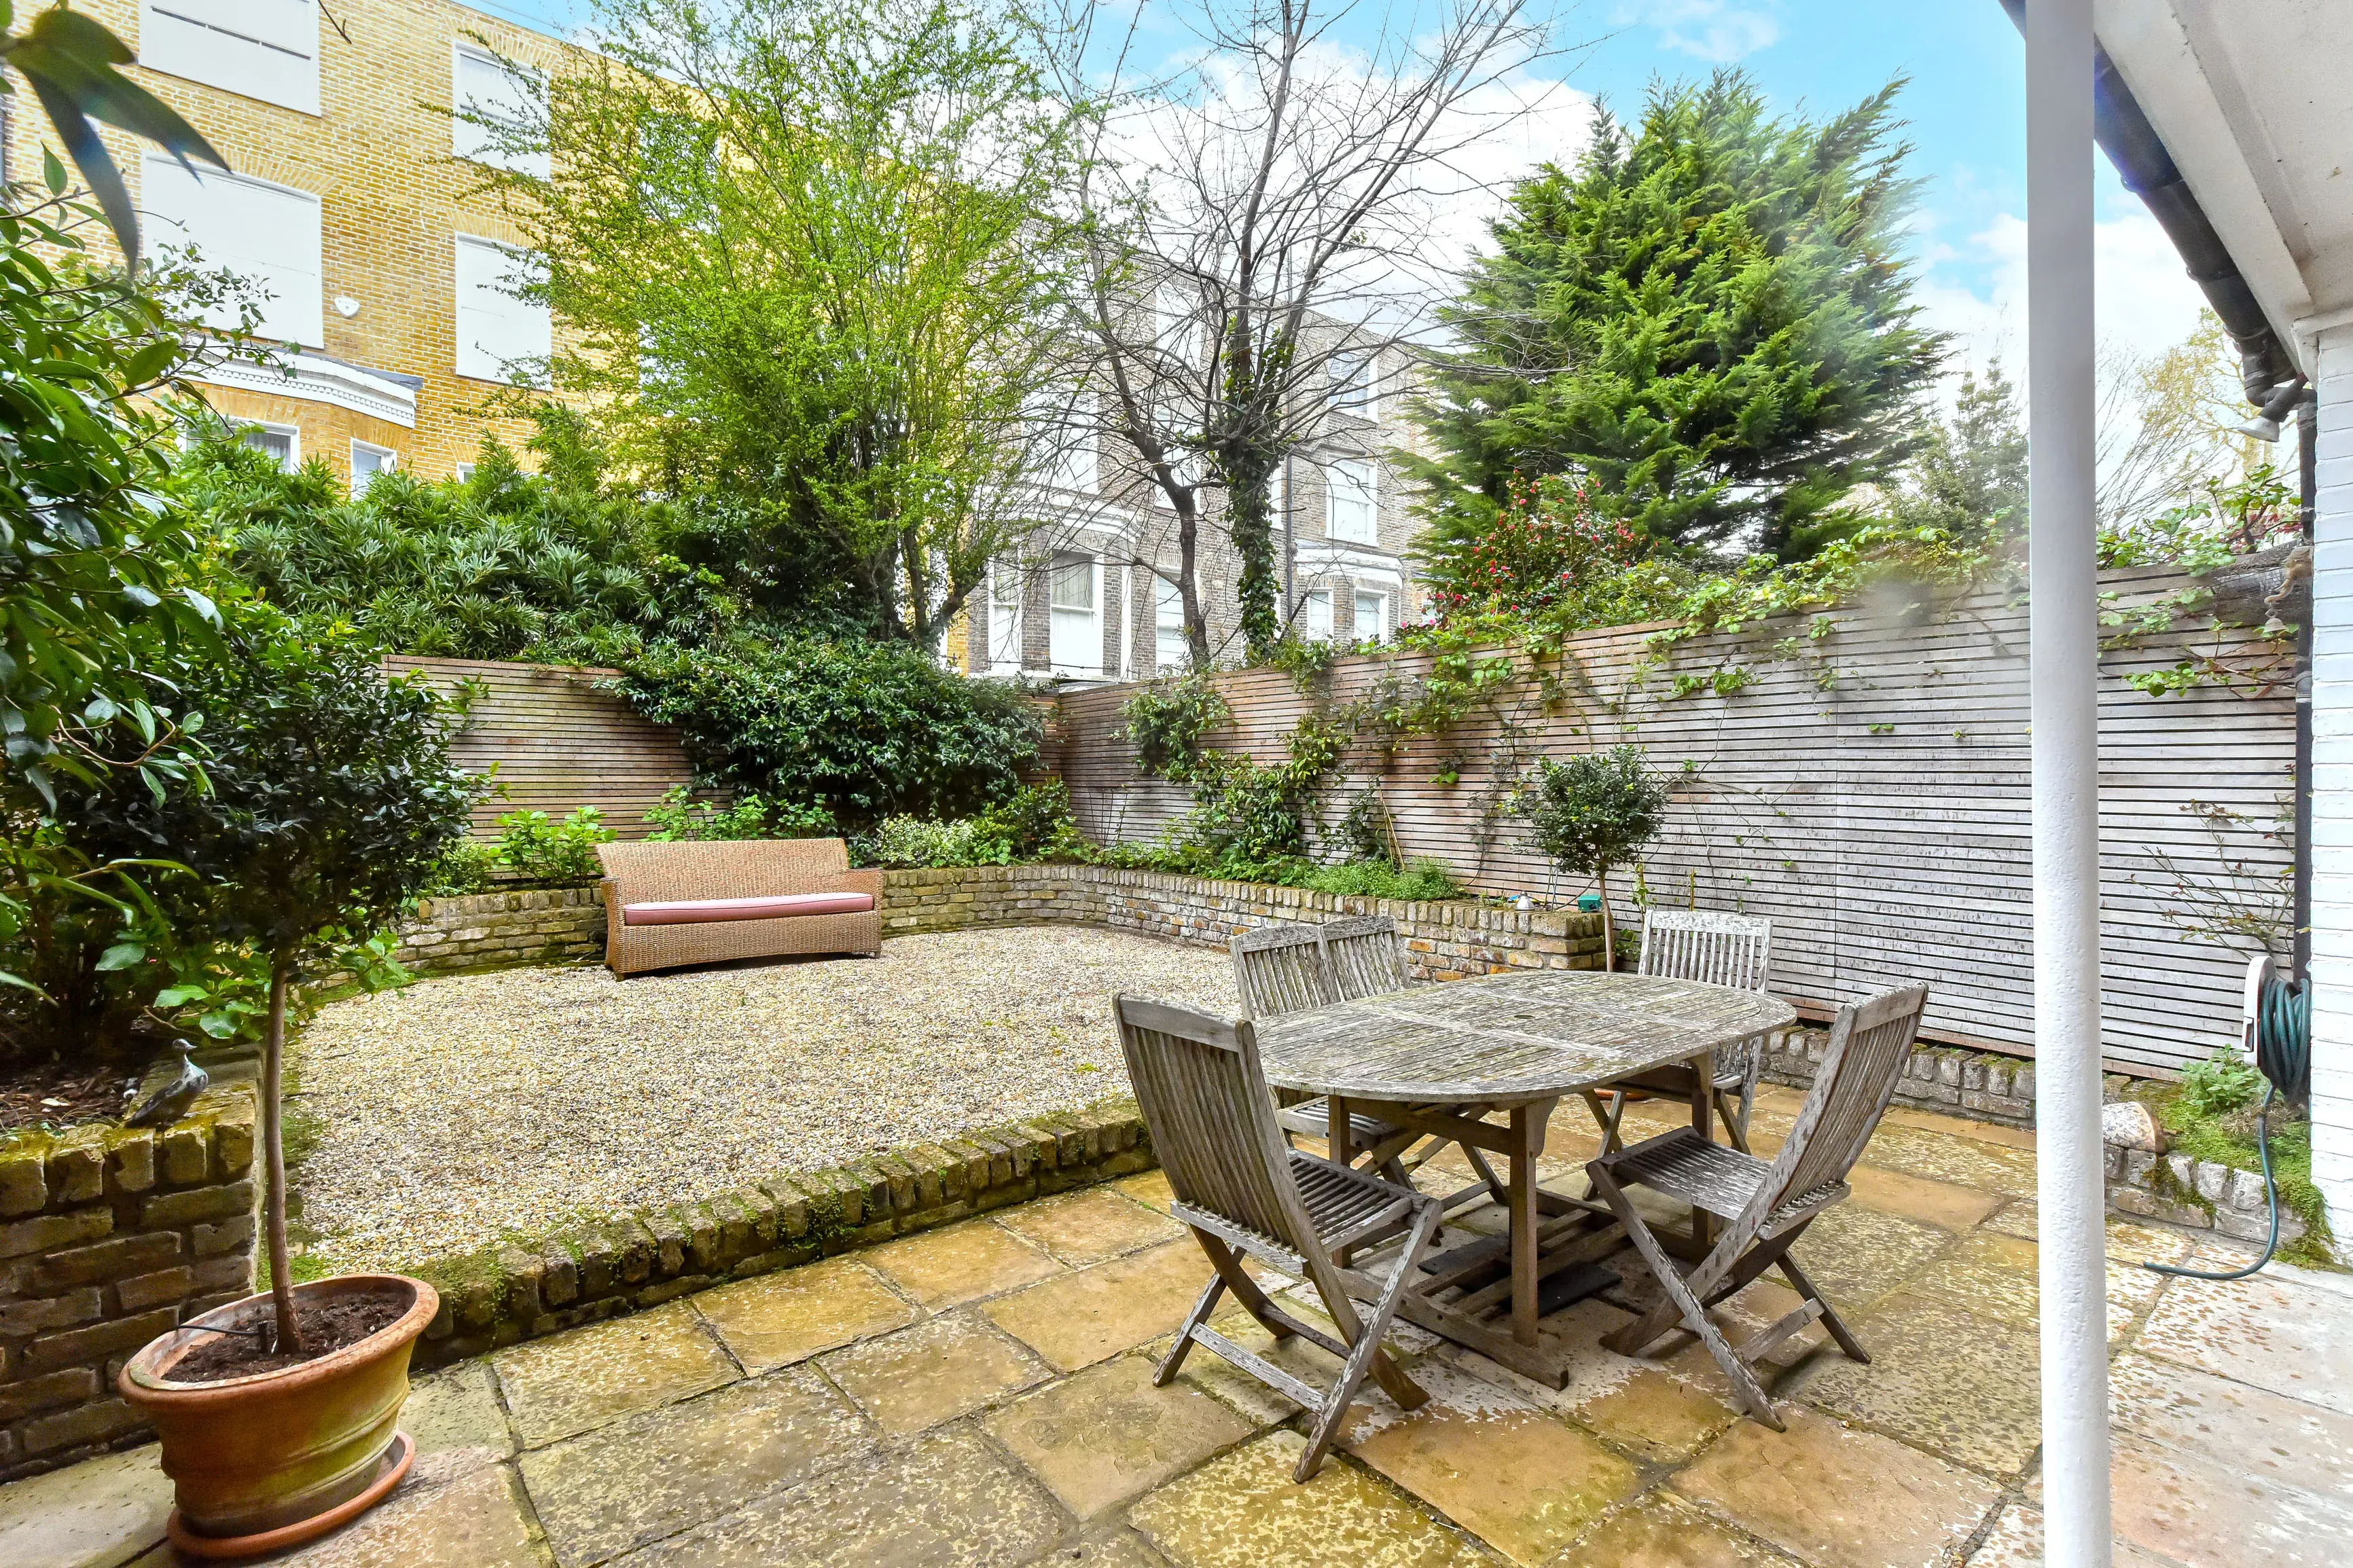 Palace Gardens Terrace , holiday home in Kensington, London